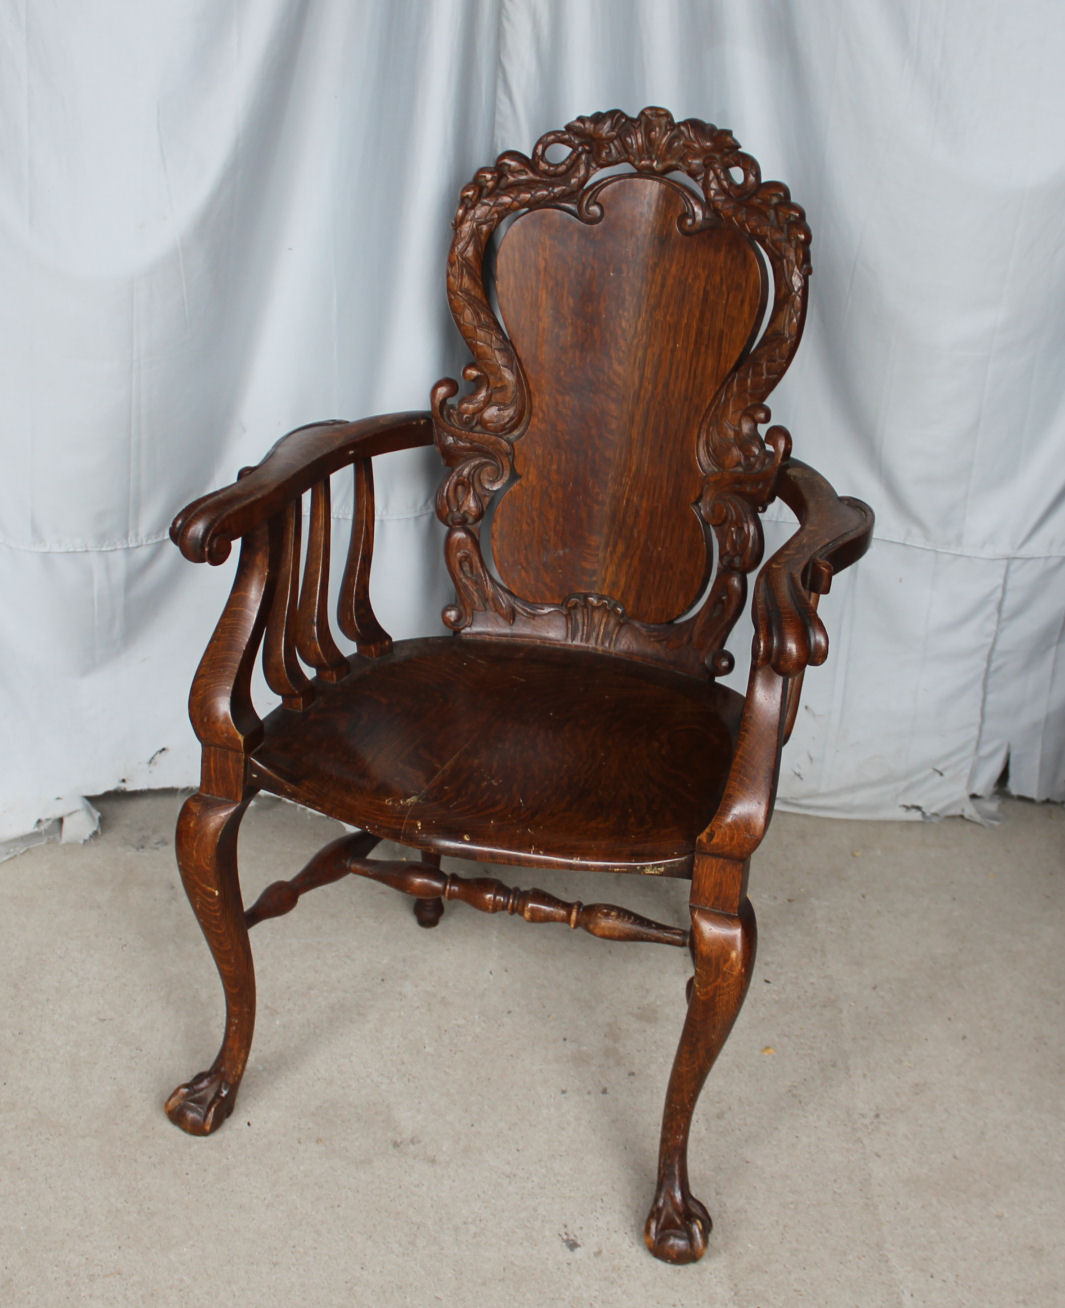 Antique Wooden Chairs With Arms - pic-corn